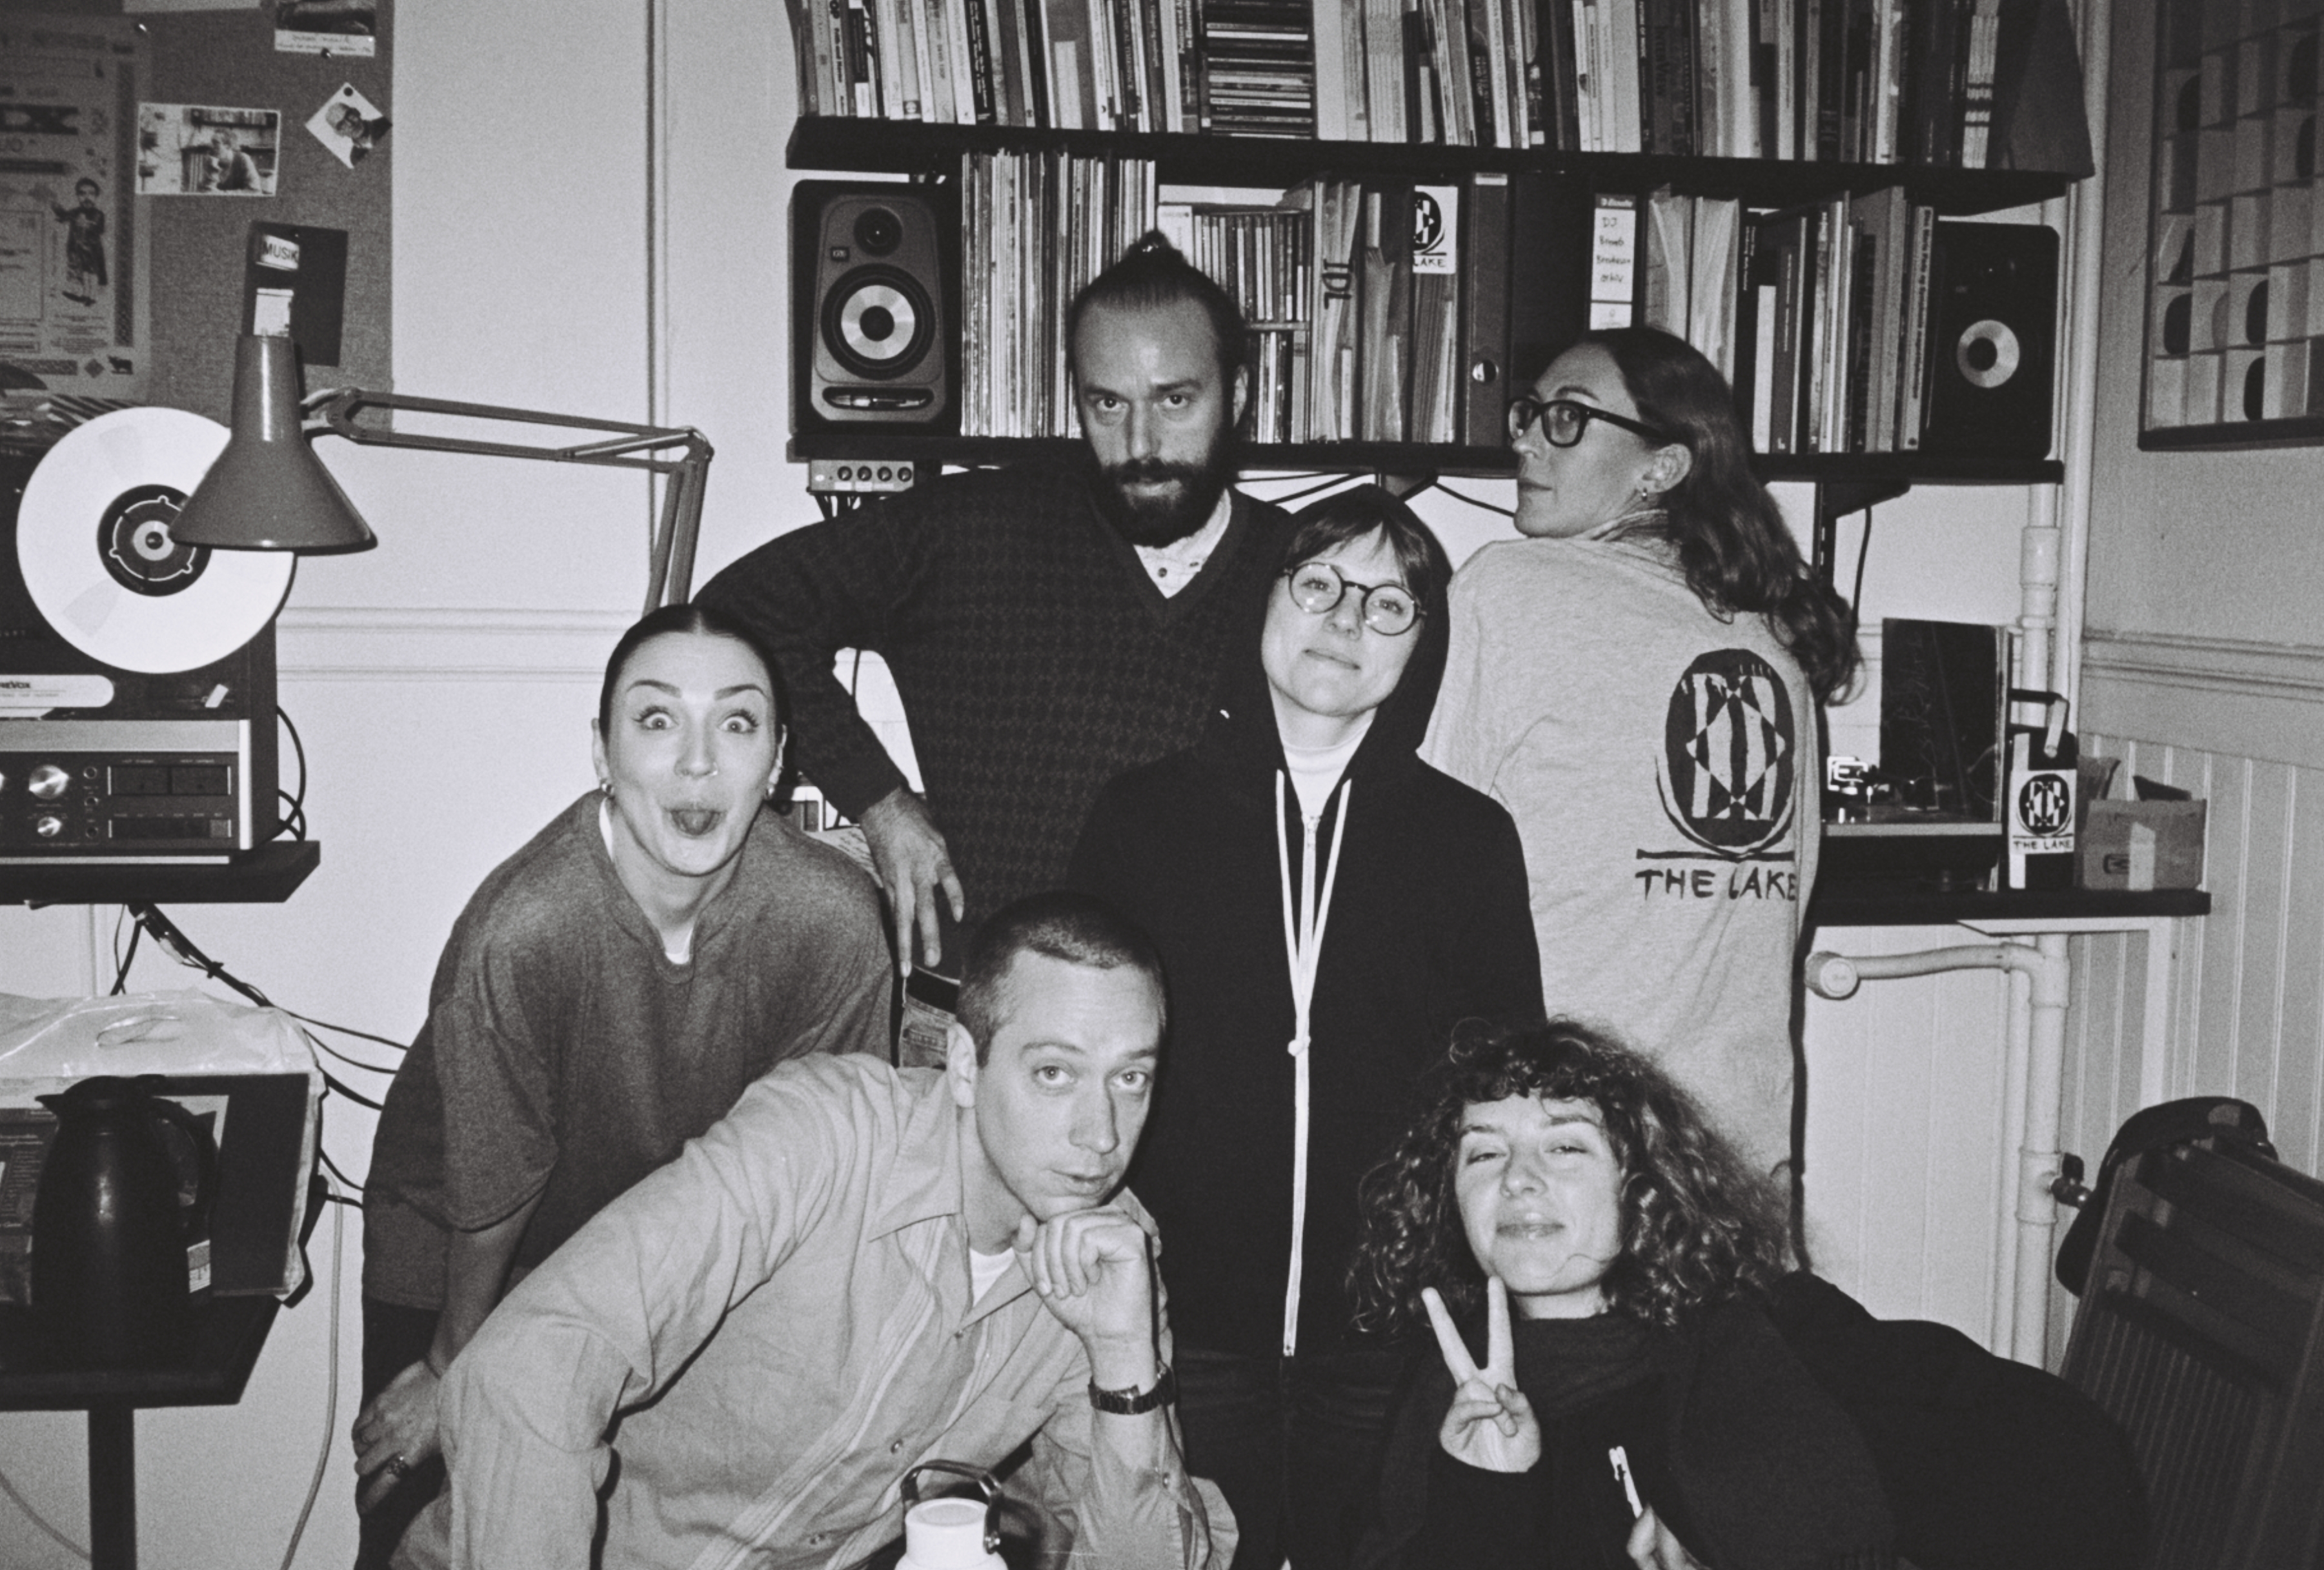 A black and white photo of six people posing while all looking into the camera. In the background there is sound equipment, speakers, and shelves full of CDs, vinyl and books.